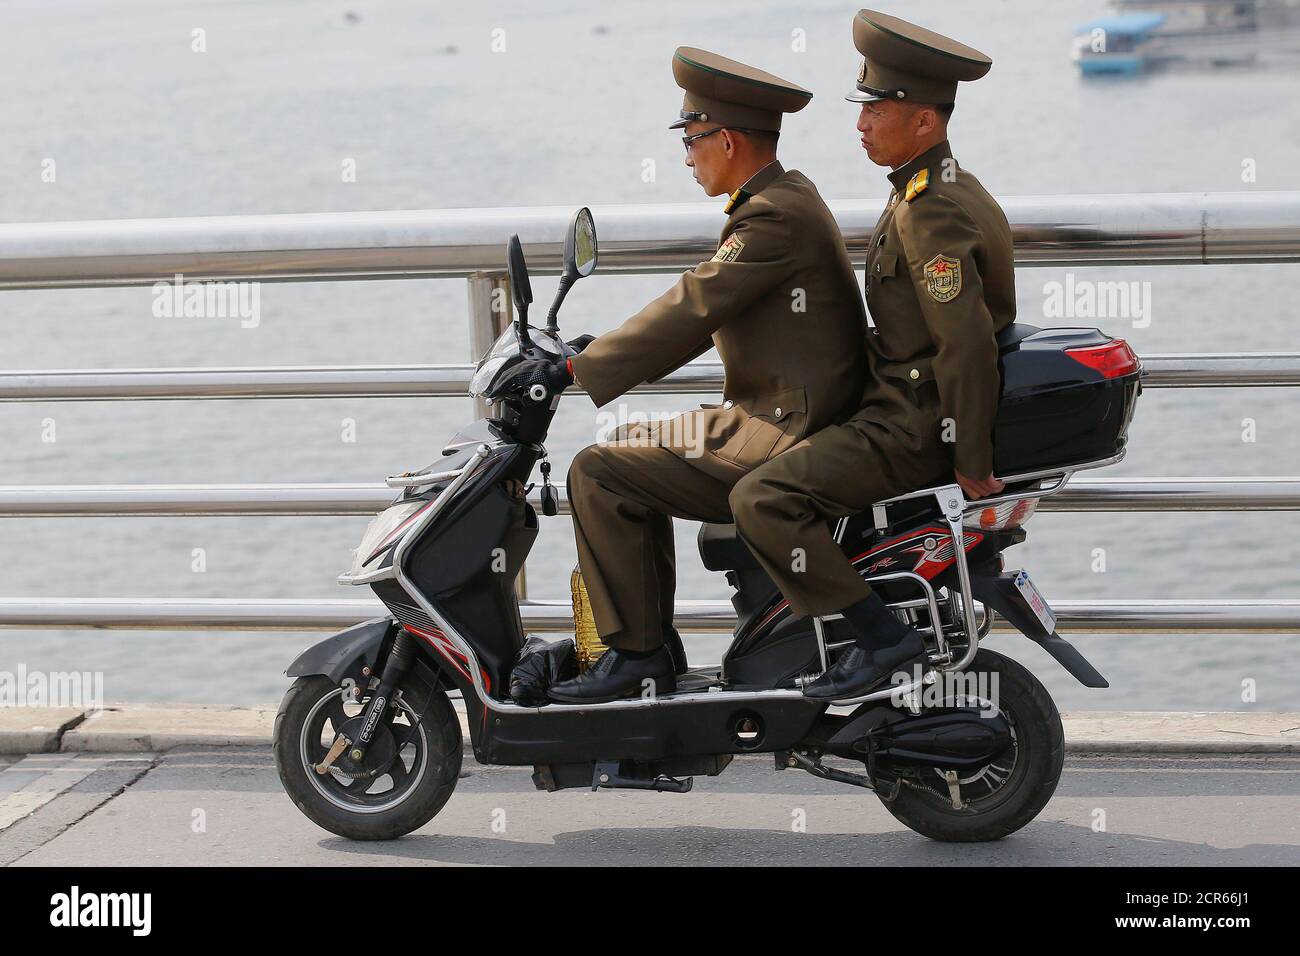 Soldiers cross the bridge on an electric scooter in central Pyongyang,  North Korea April 16, 2017. REUTERS/Damir Sagolj Stock Photo - Alamy